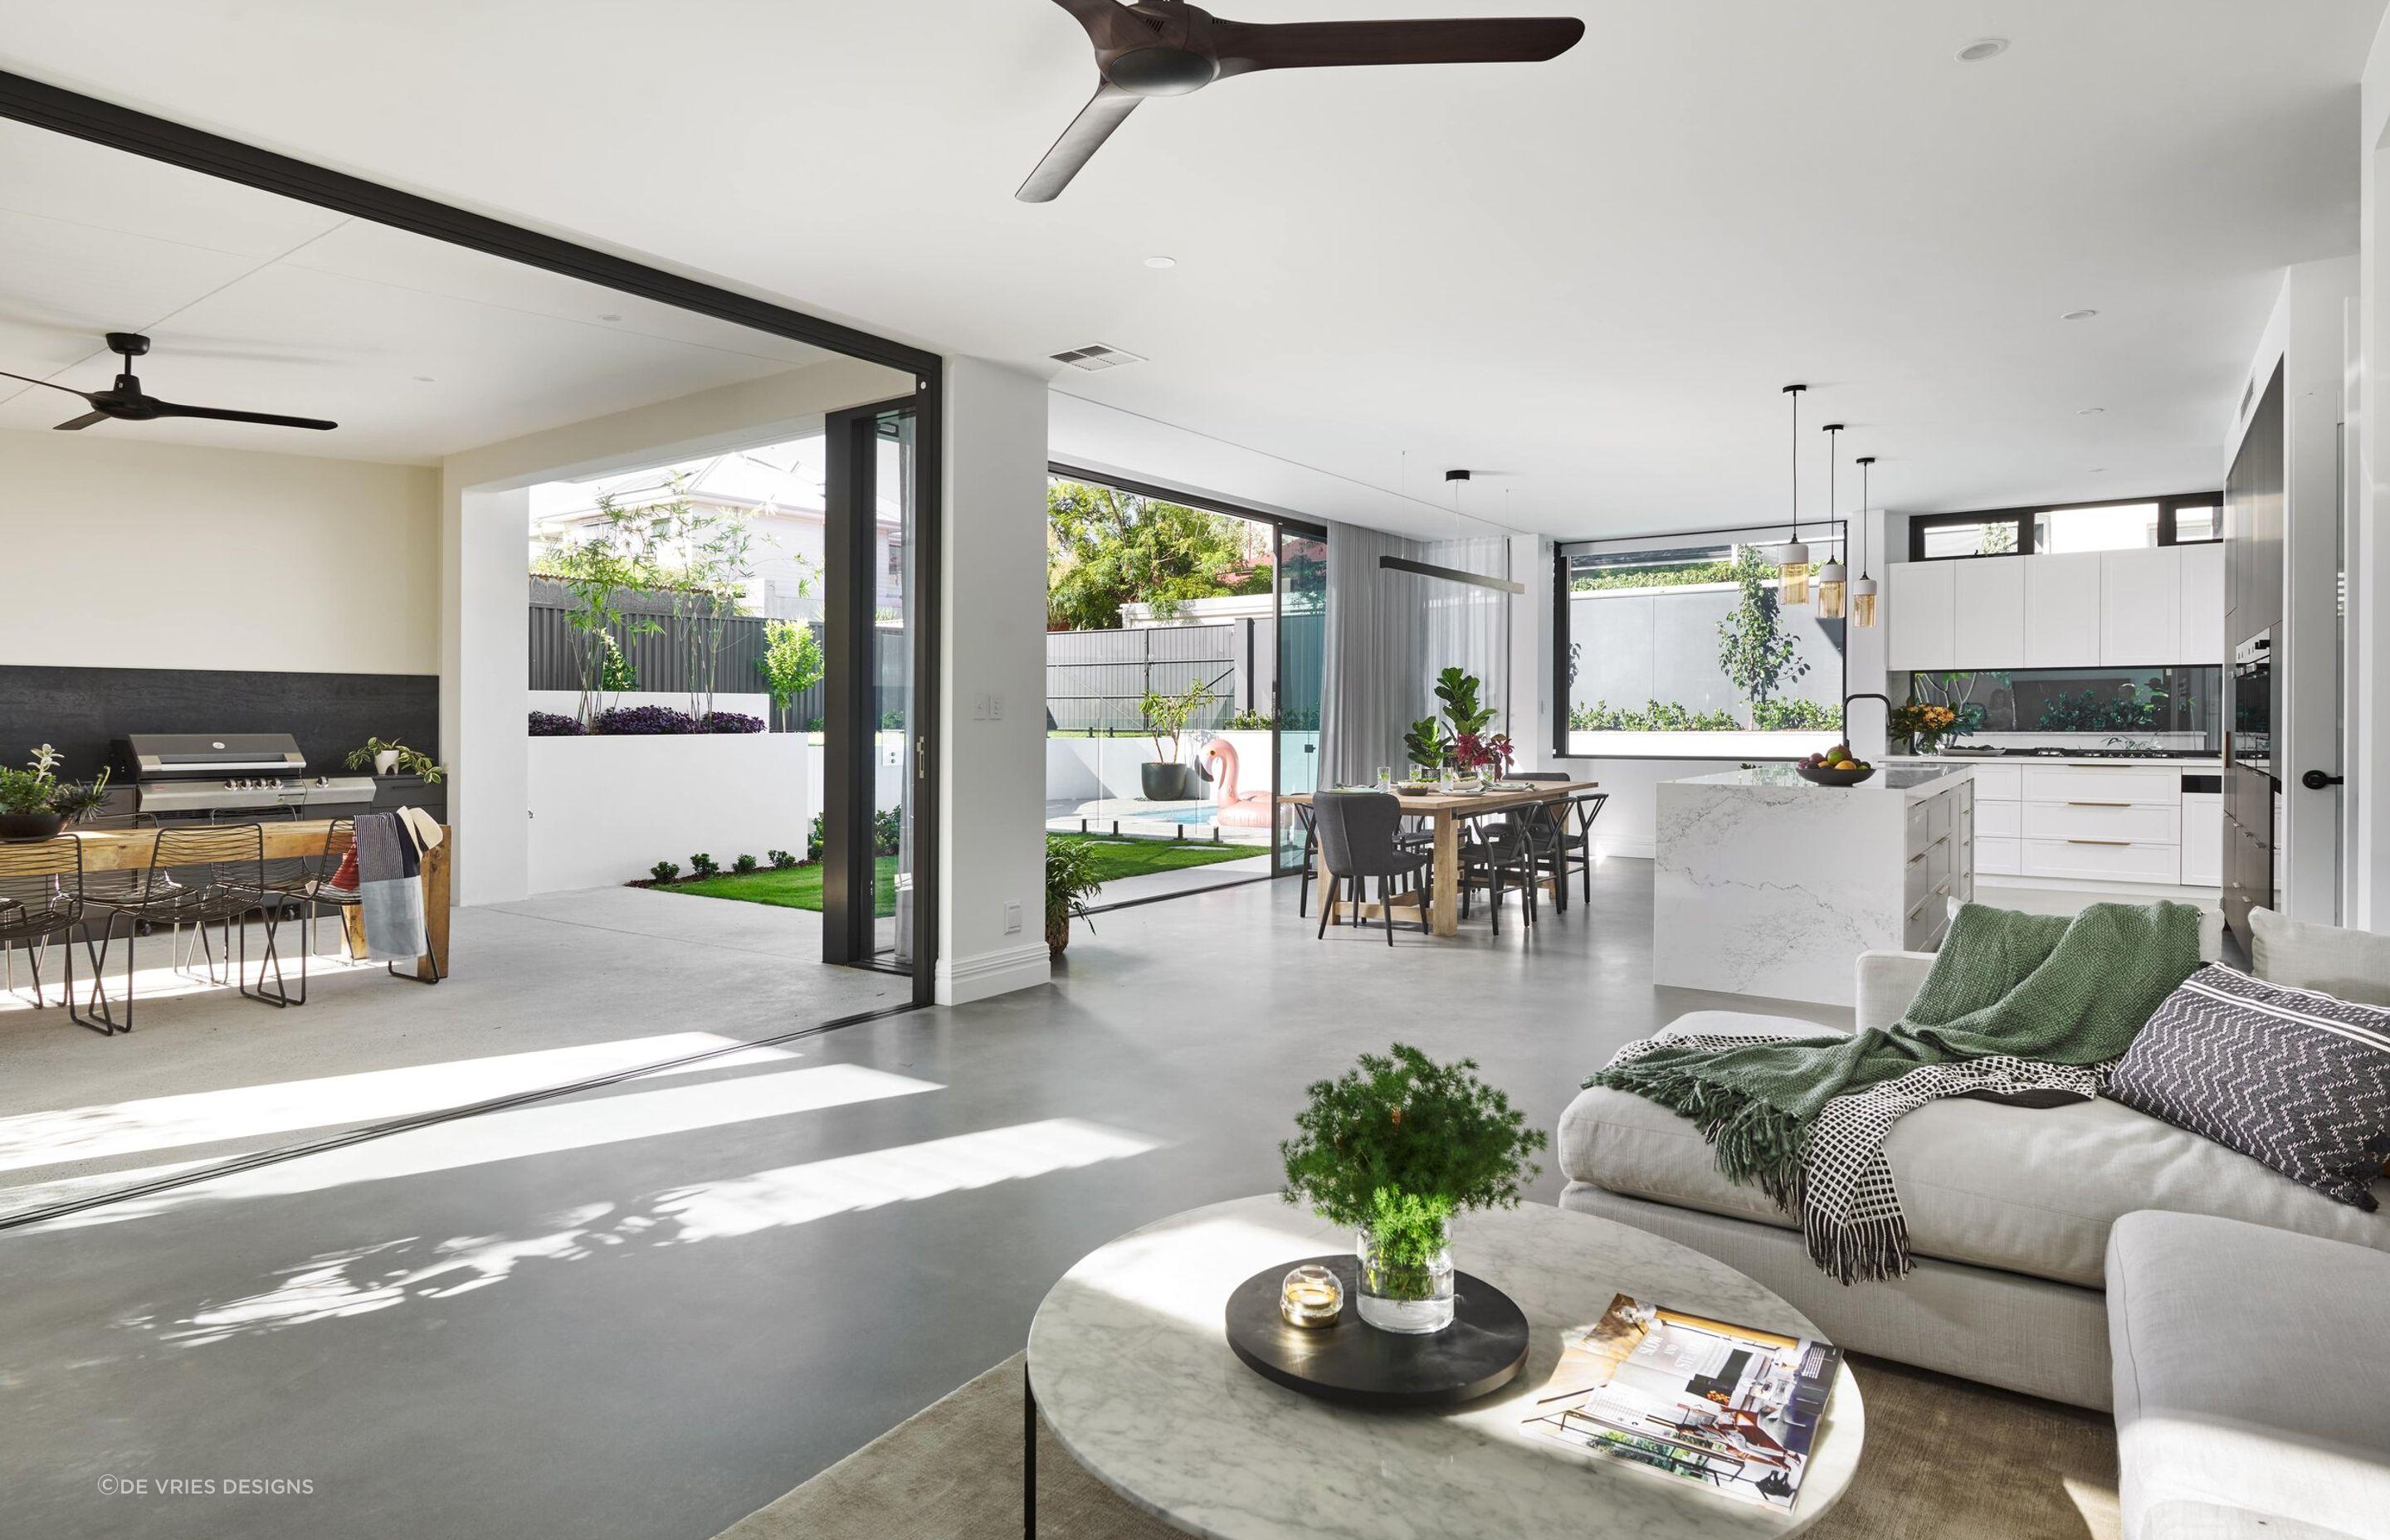 This living room in a newly built home in Cottesloe, WA, has a natural freshness to it.